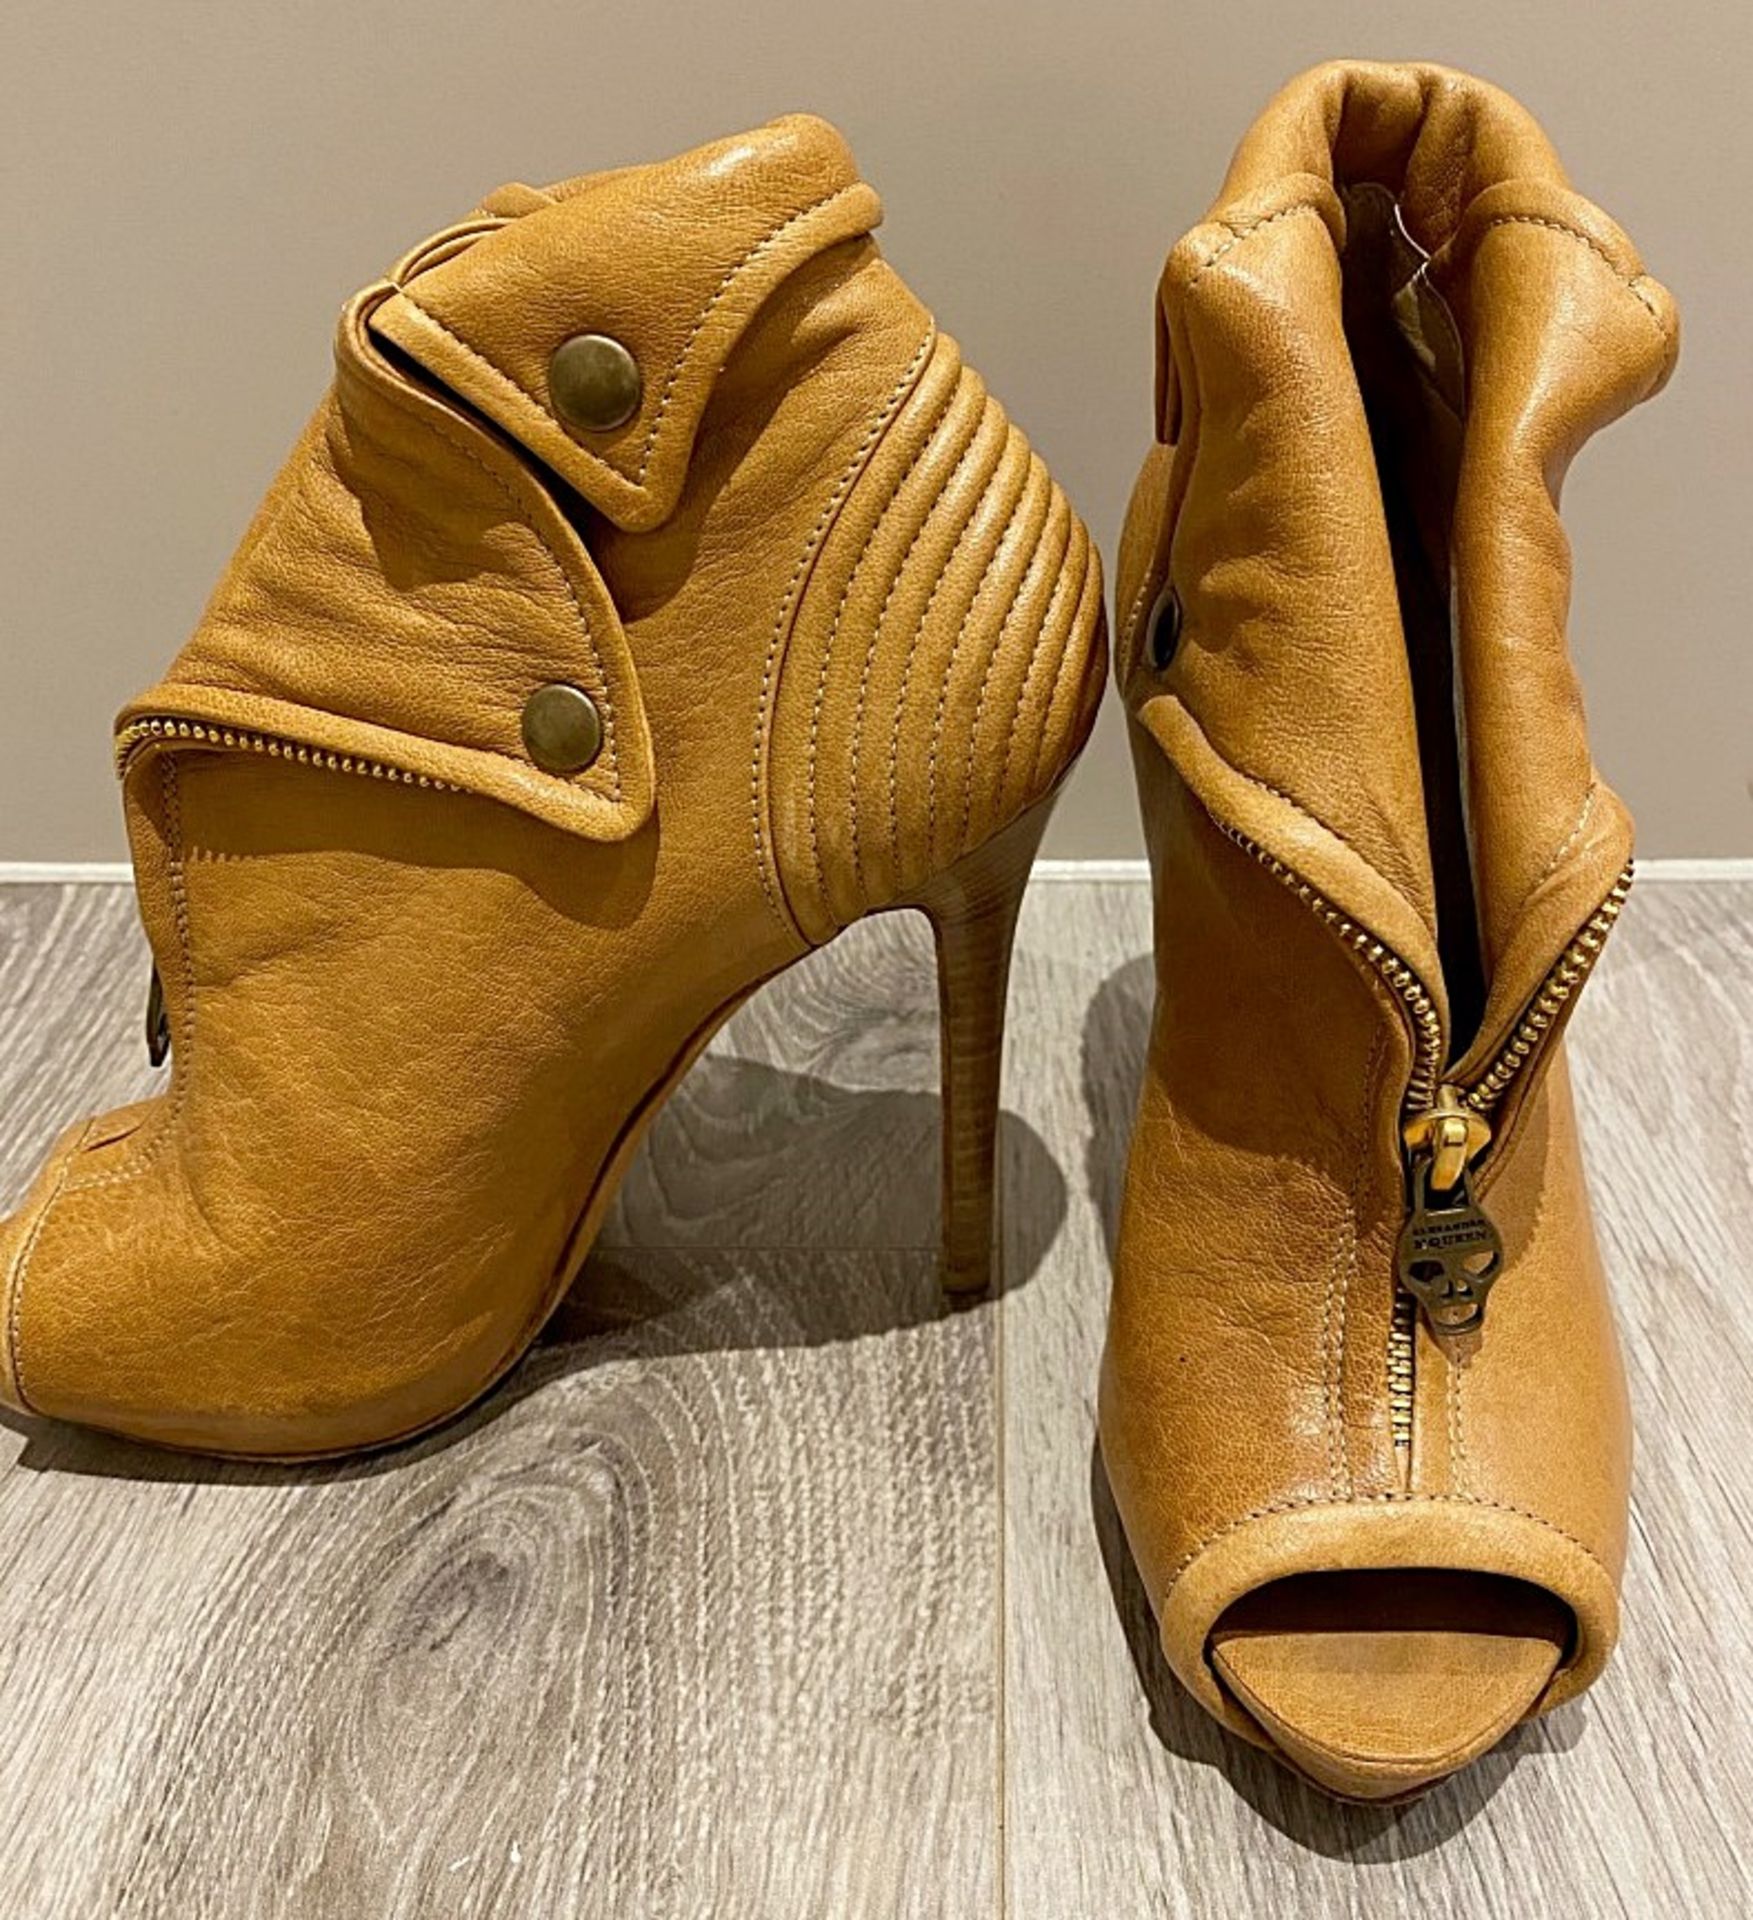 1 x Pair Of Genuine Alexander Mcqueen High Heel Shoes In Tan - Size: 37 - Preowned in Very Good